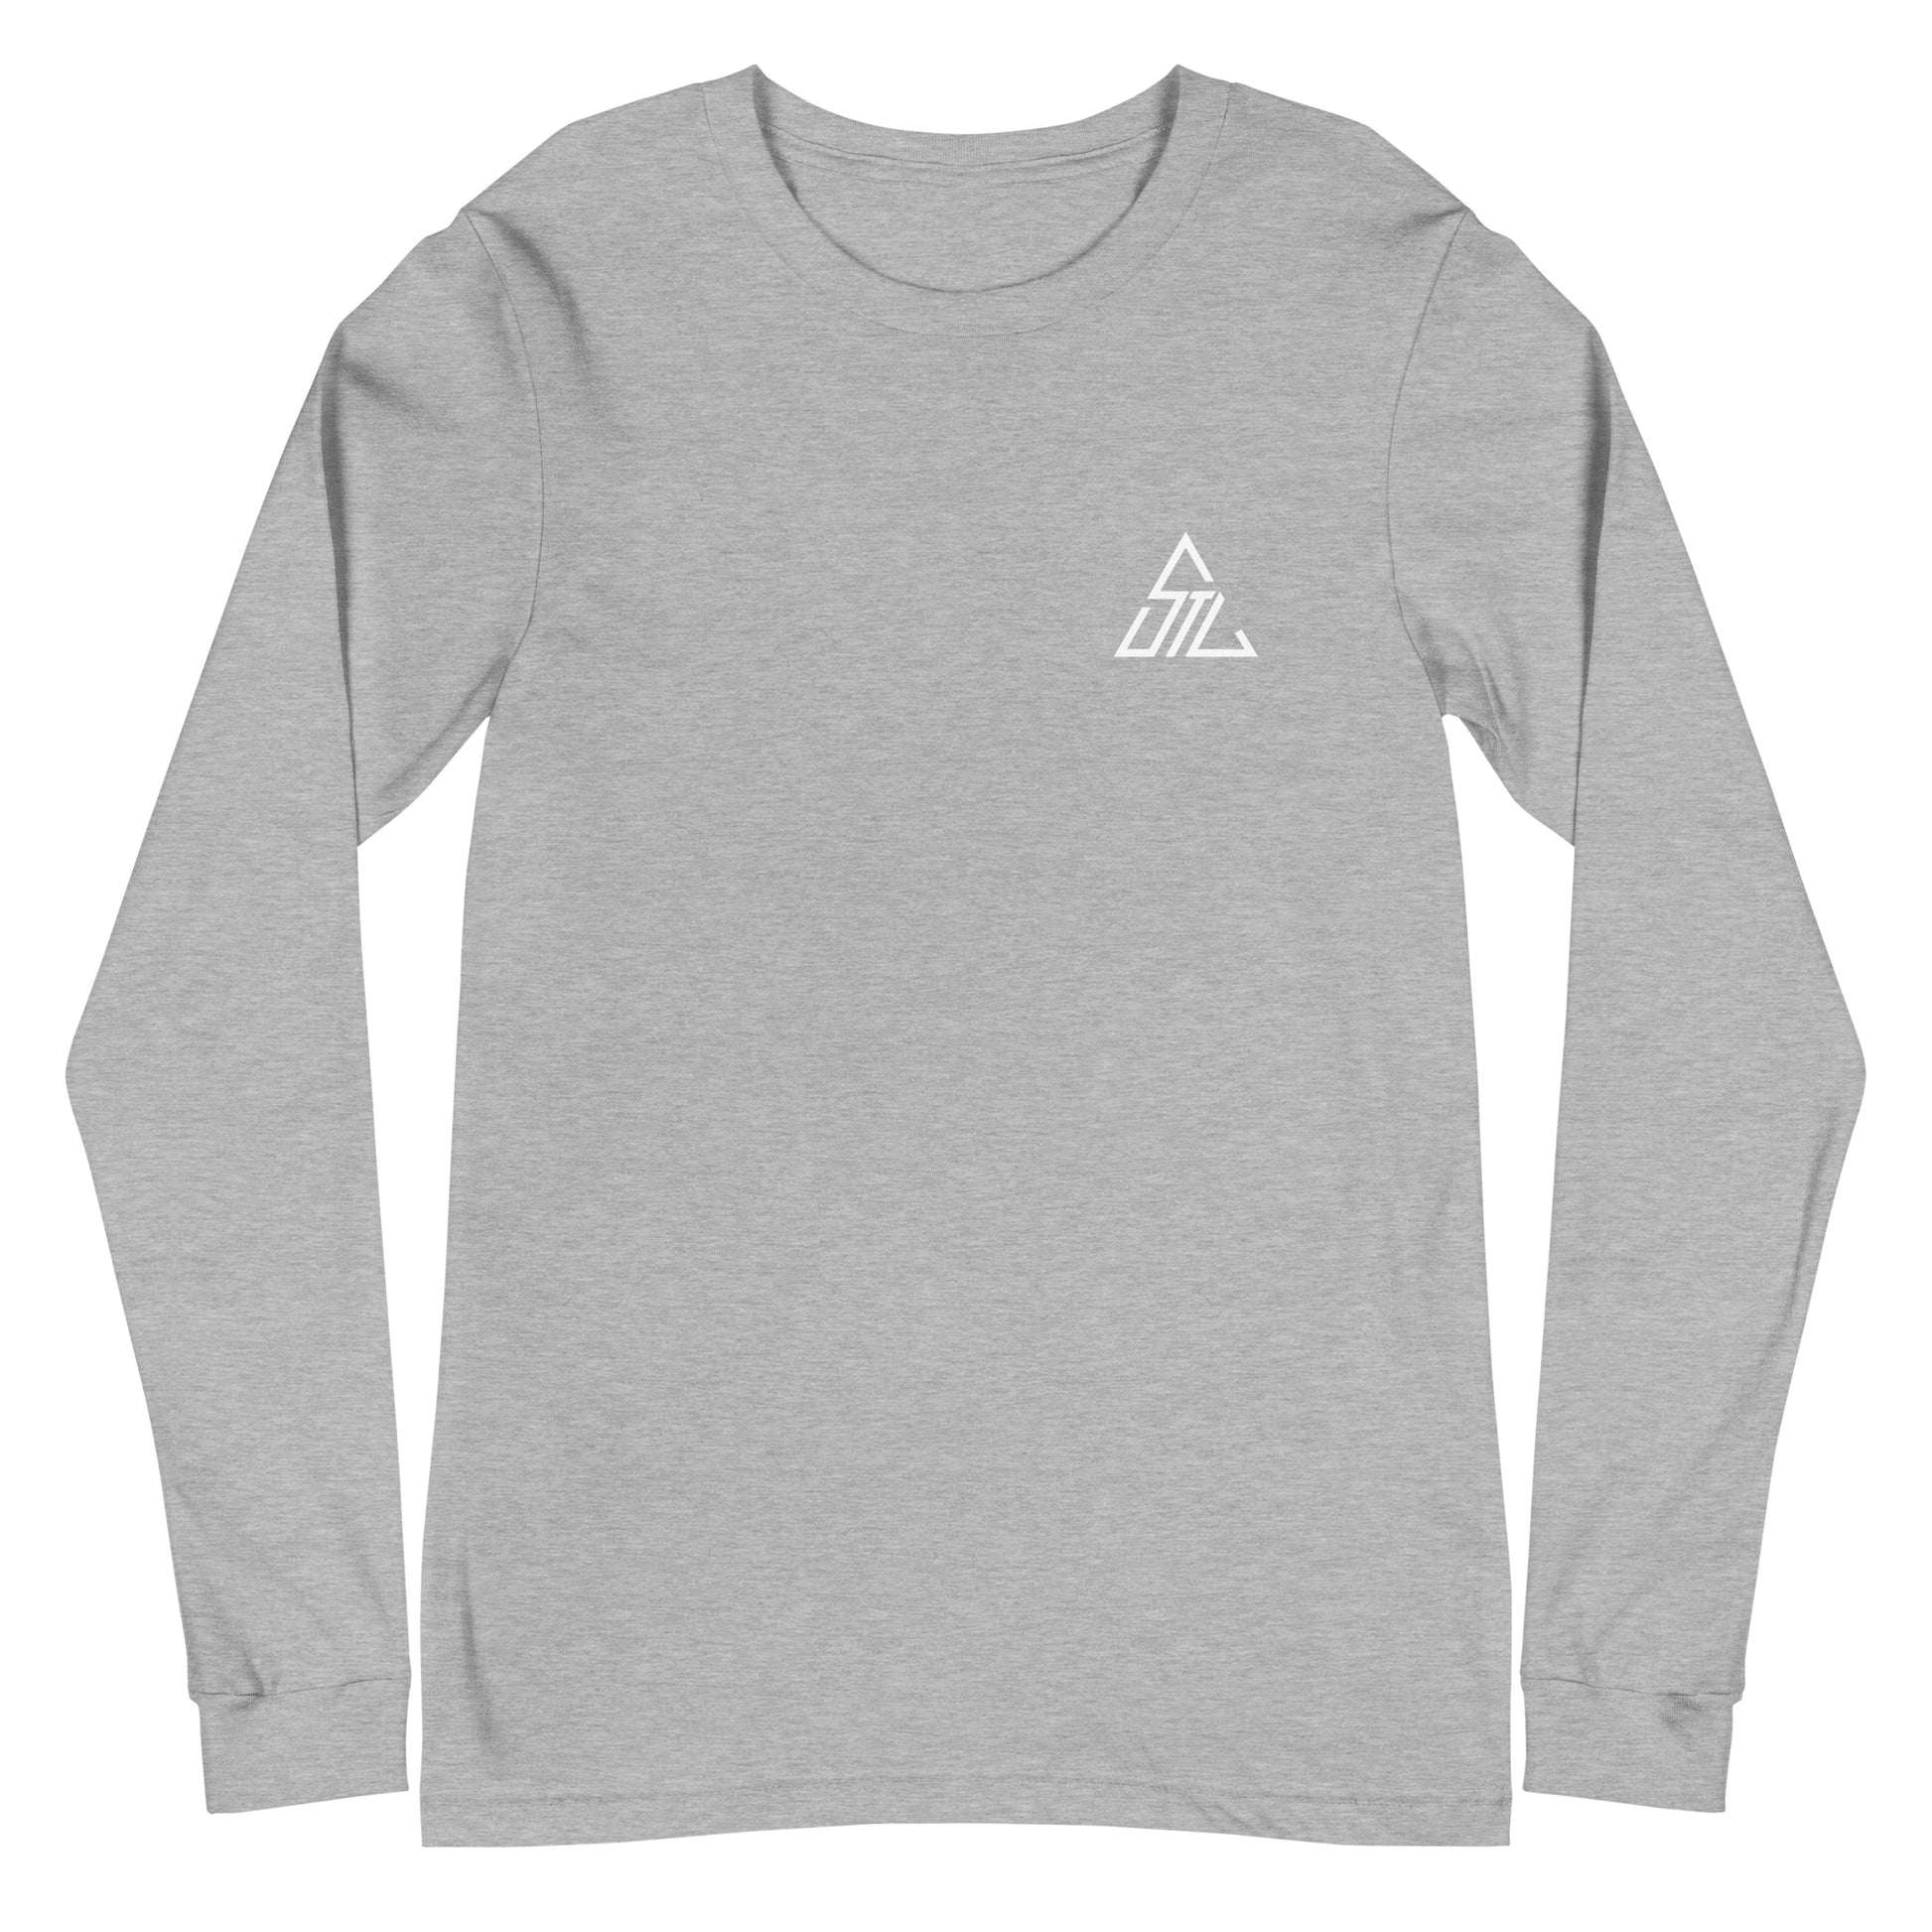 Two More Skip The Last "Bluebird" heather grey unisex Long sleeve t-shirt. Front view